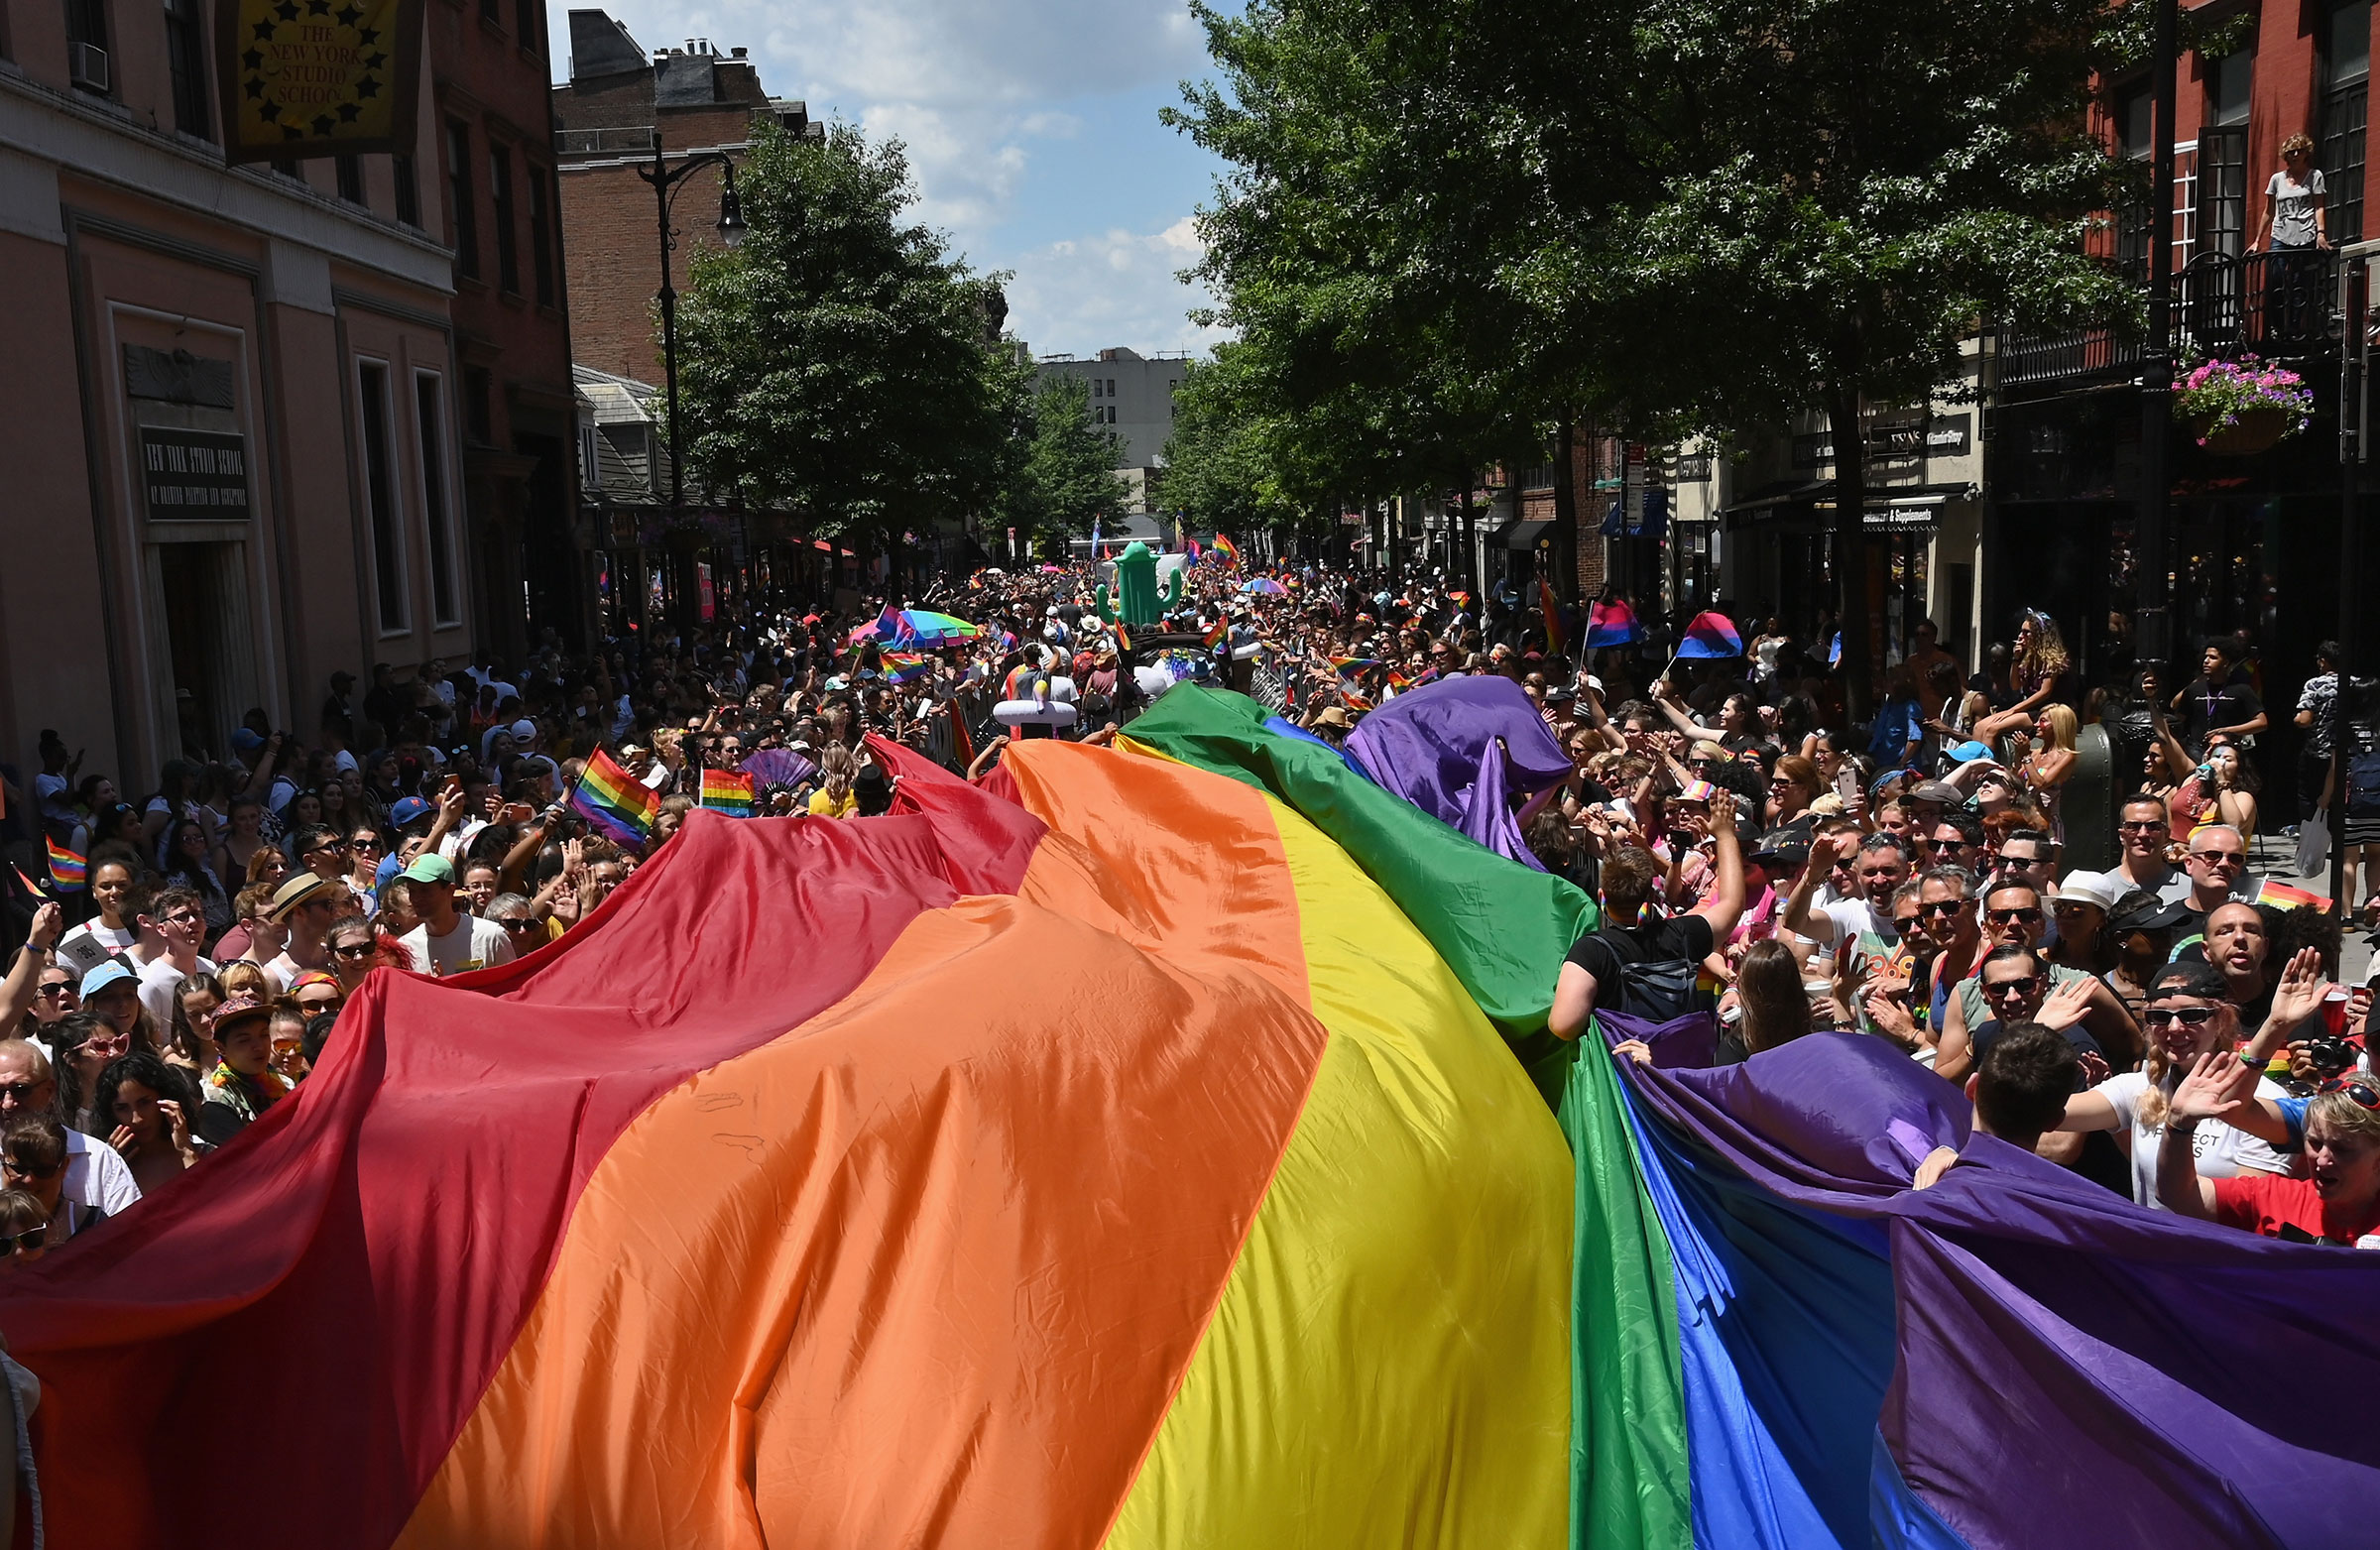 when is the gay pride parade 2019 chicago